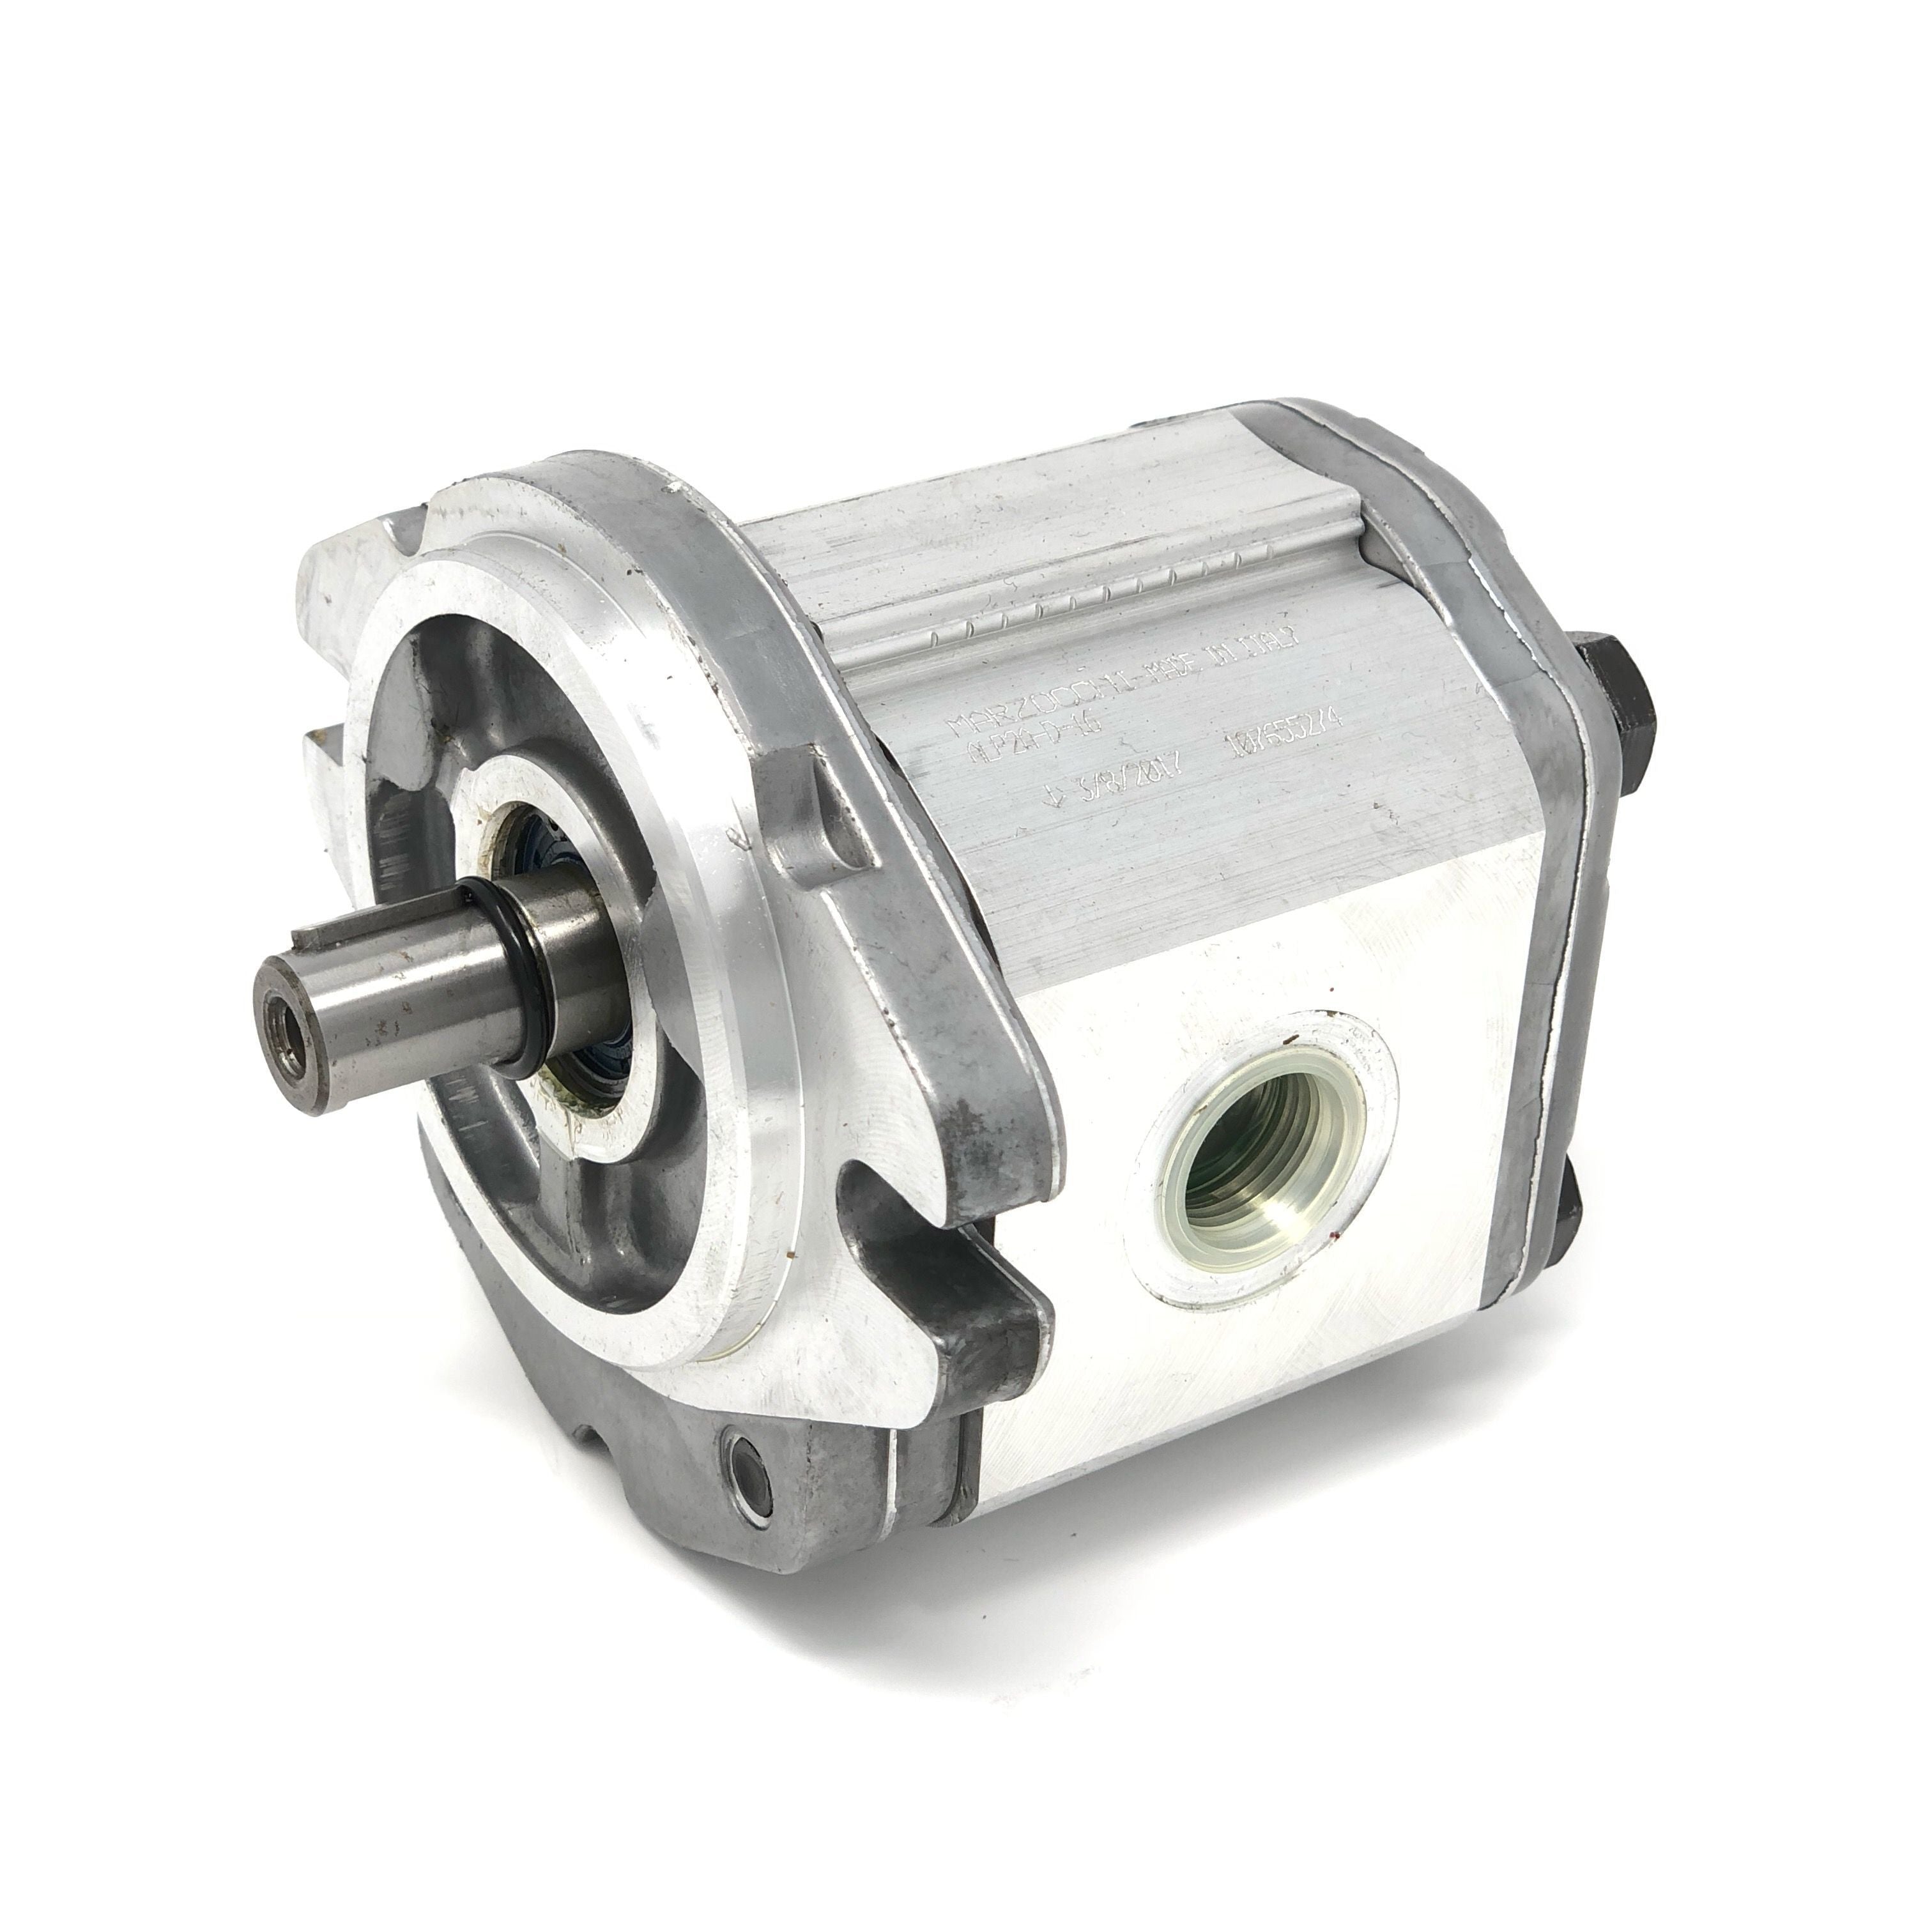 ALP2A-D-9 : Marzocchi Gear Pump, CW, 6.4cc (0.3904in3), 3.04 GPM, 3625psi, 4000 RPM, #12 SAE (3/4") In, #10 SAE (5/8") Out, Keyed Shaft 5/8" Bore x 5/32" Key, SAE A 2-Bolt Mount